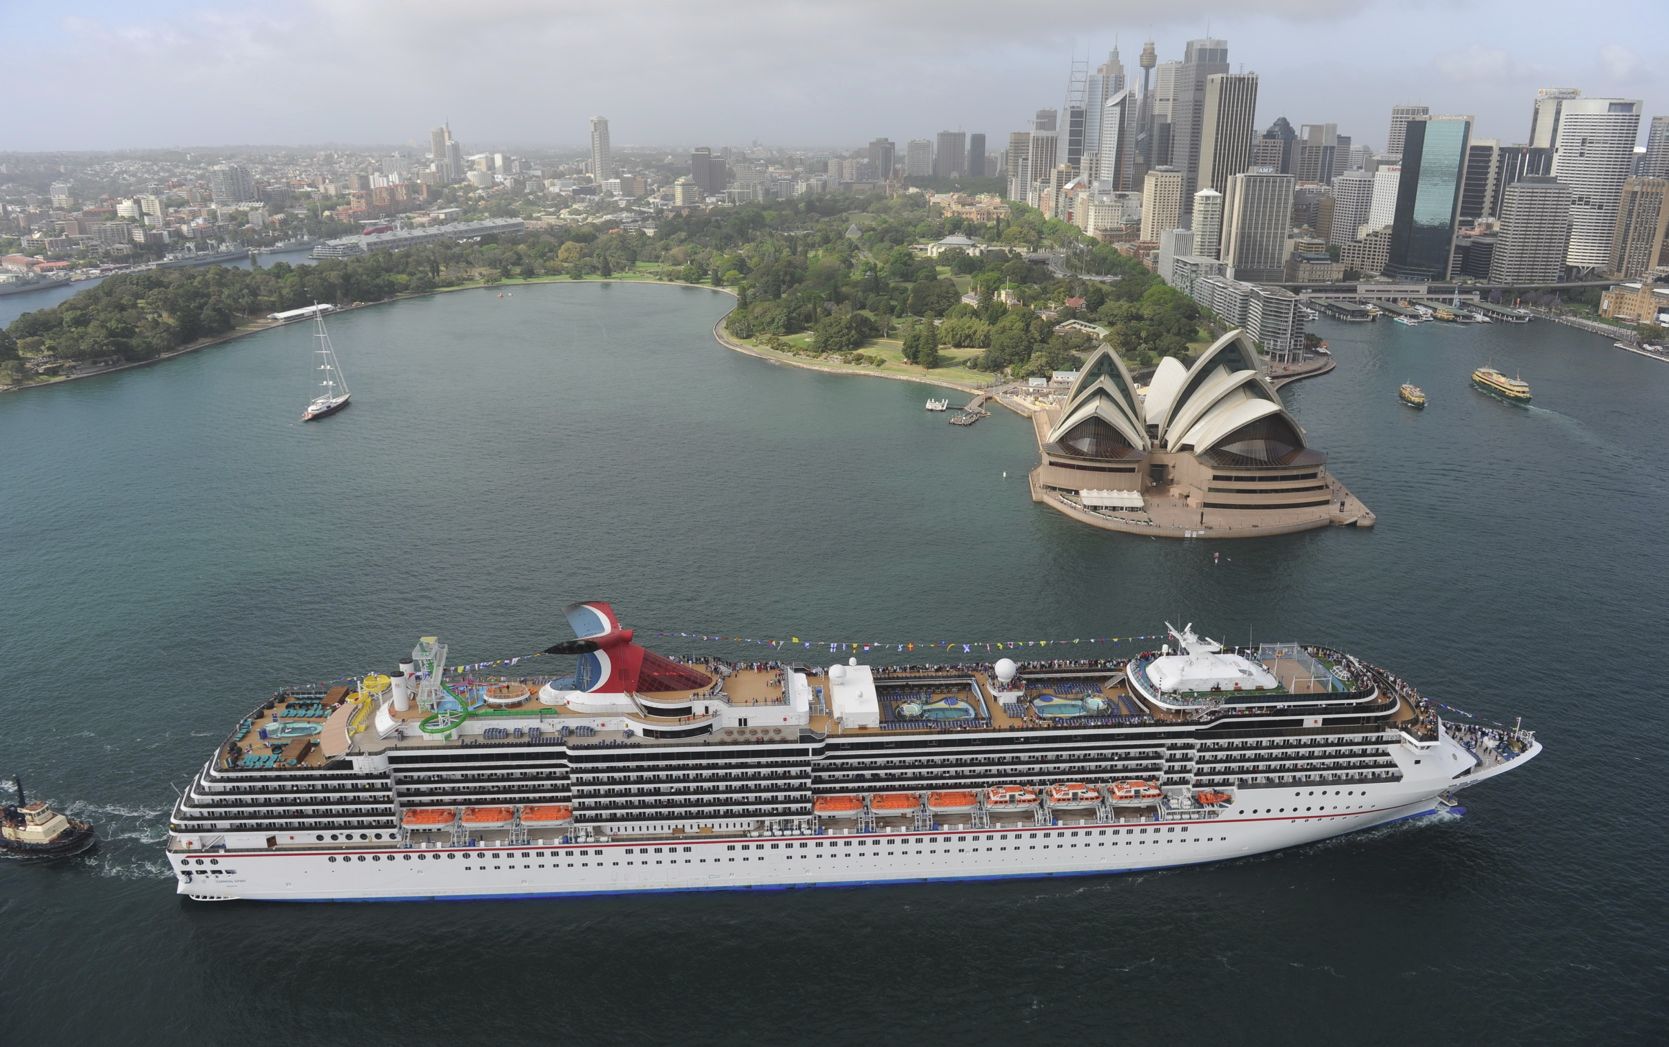 Another record - over one million Australians cruised last year